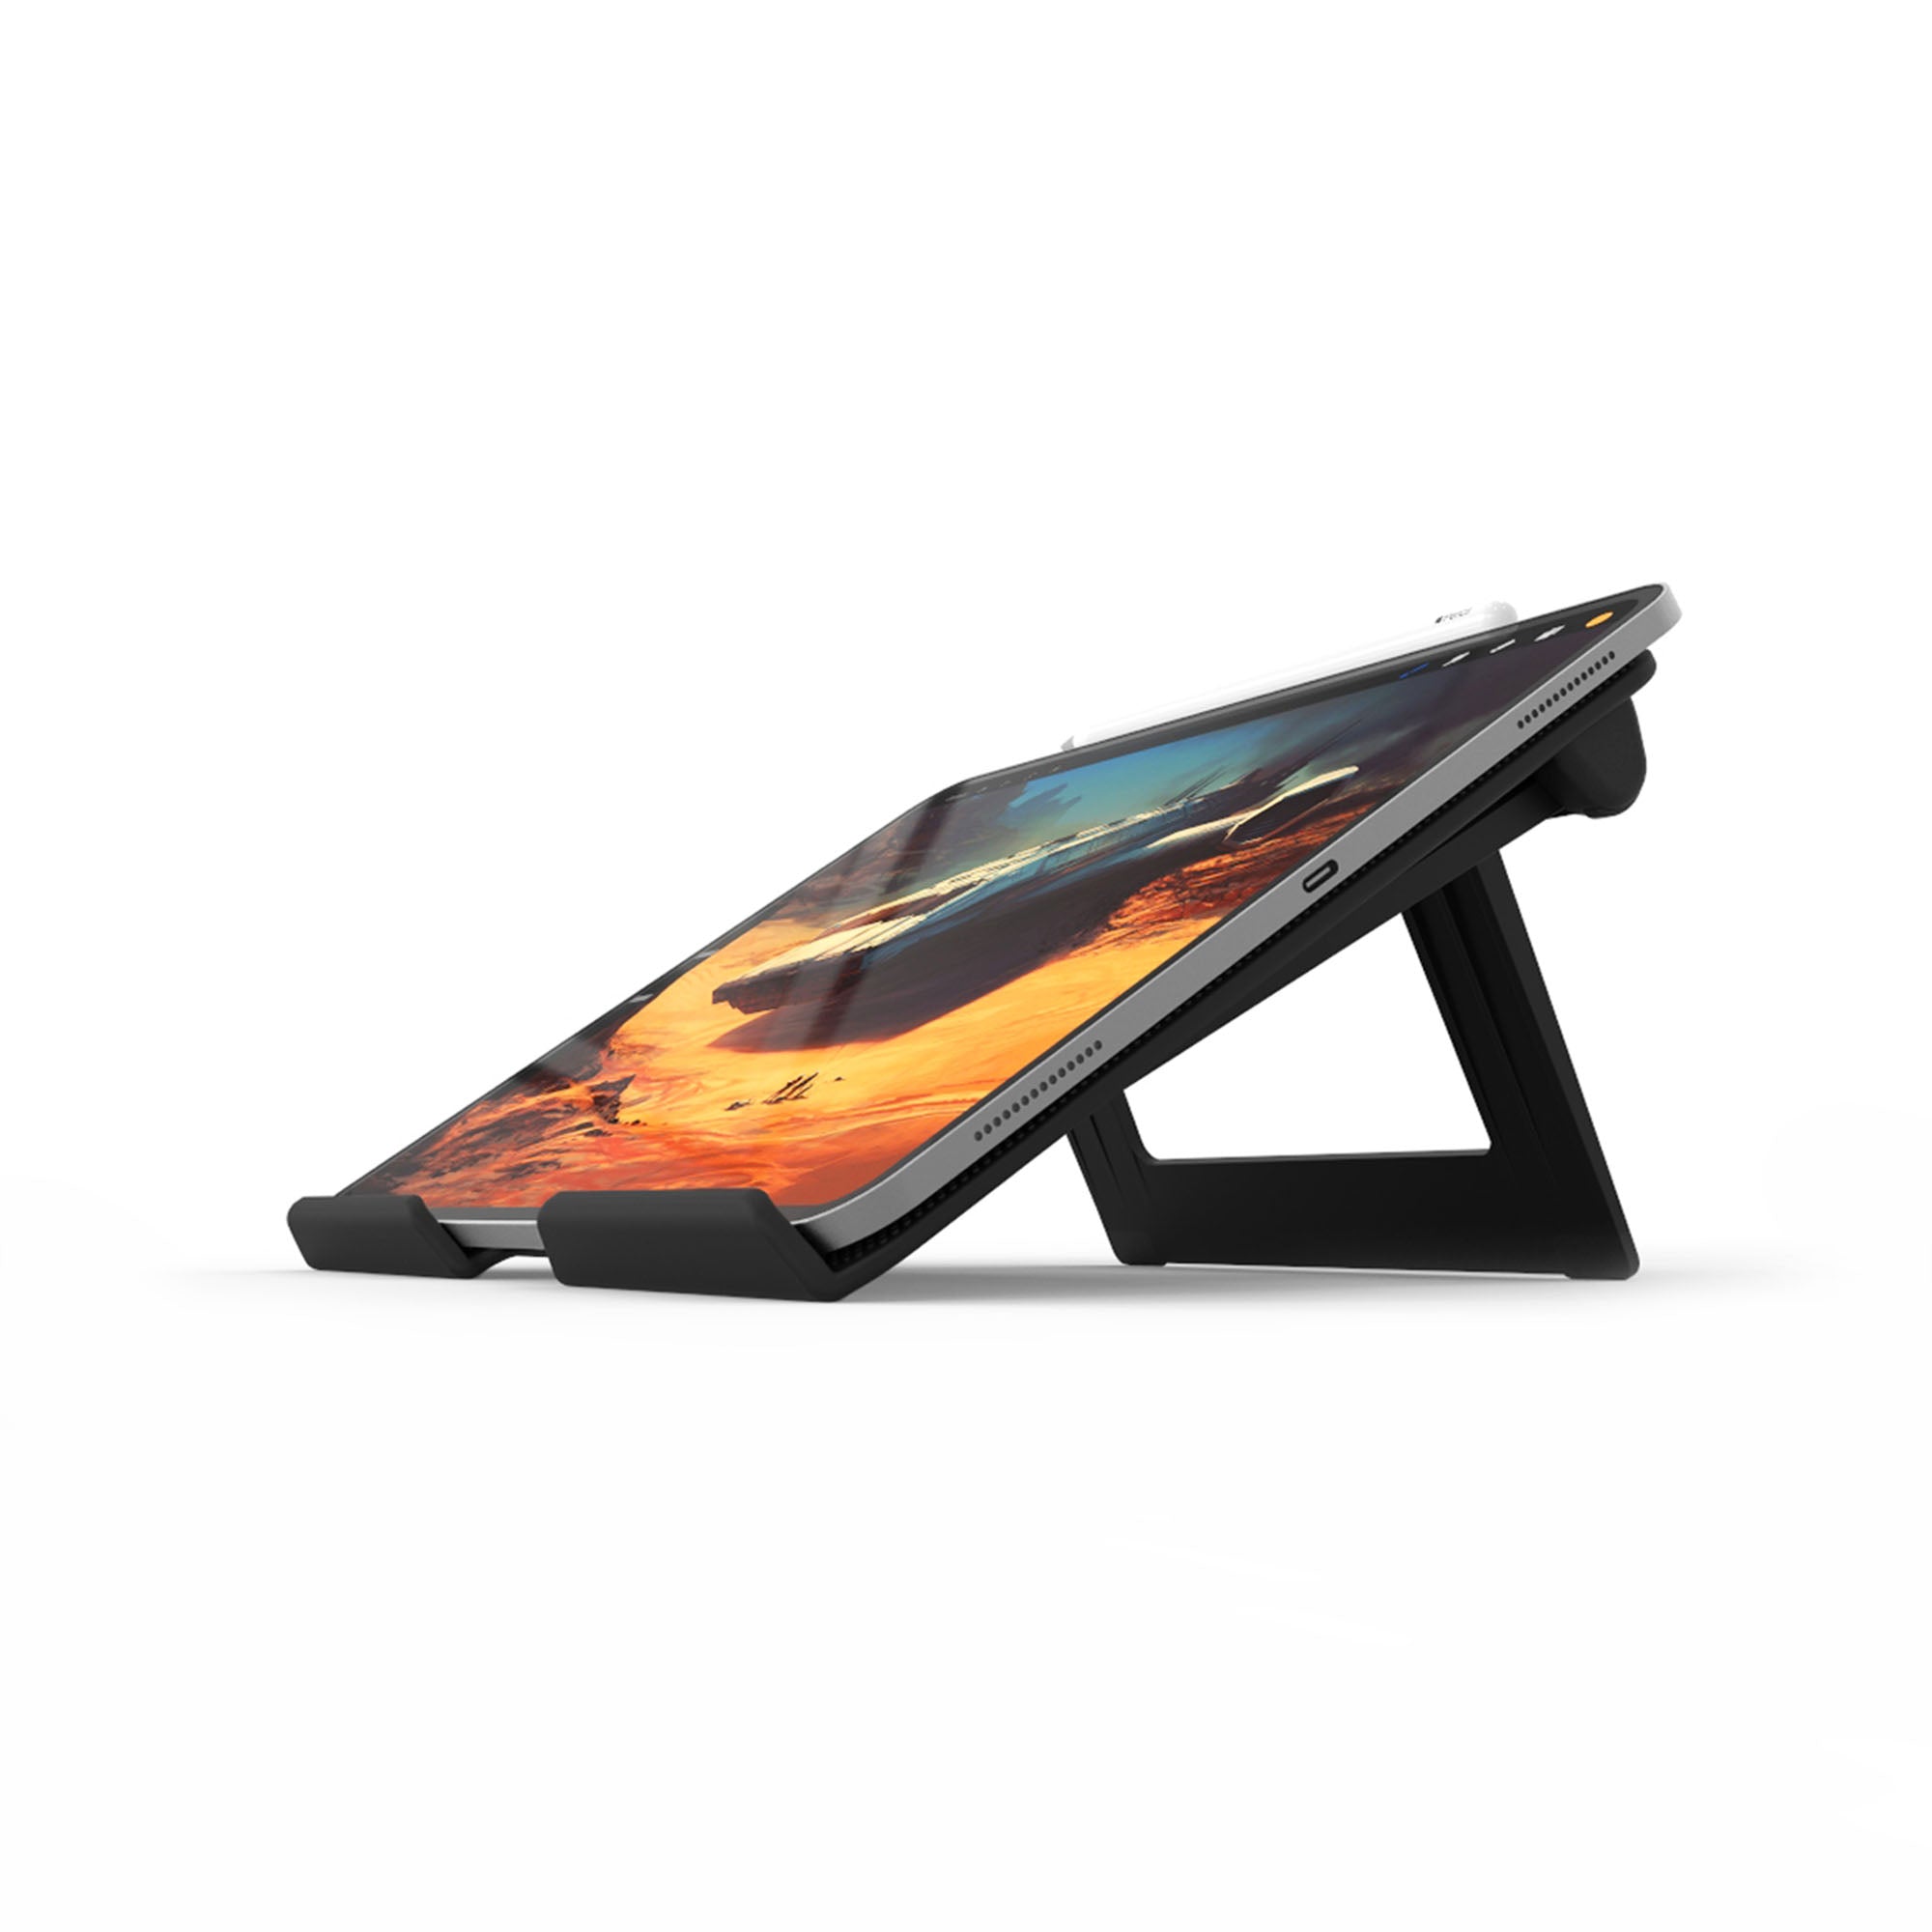 DraftTable - Professional iPad Pro Stand